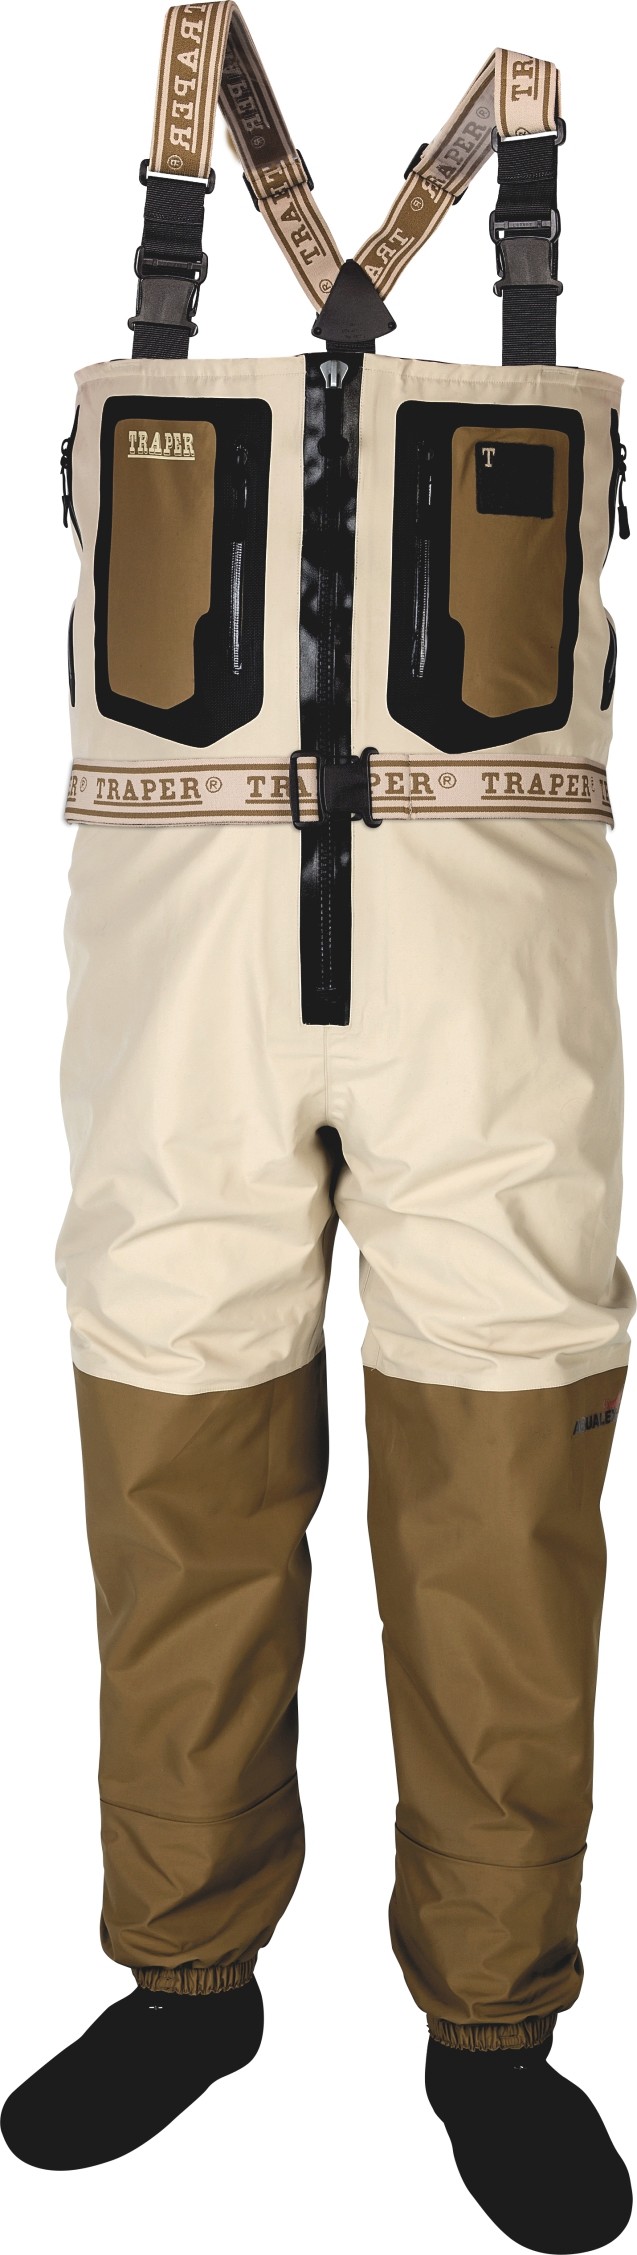 Chest Waders "TRAPER-Montana" 17_210